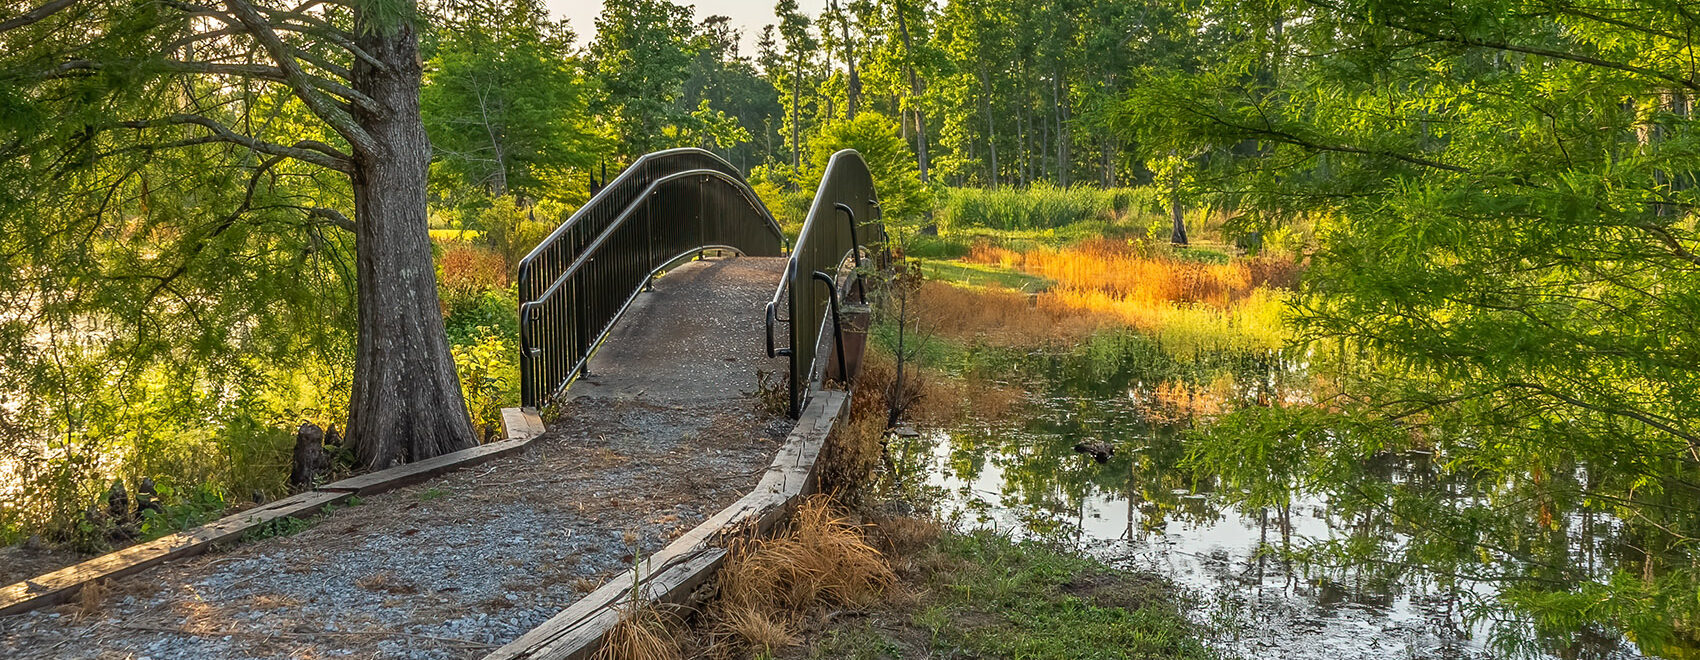 Trail and bridge over water with trees